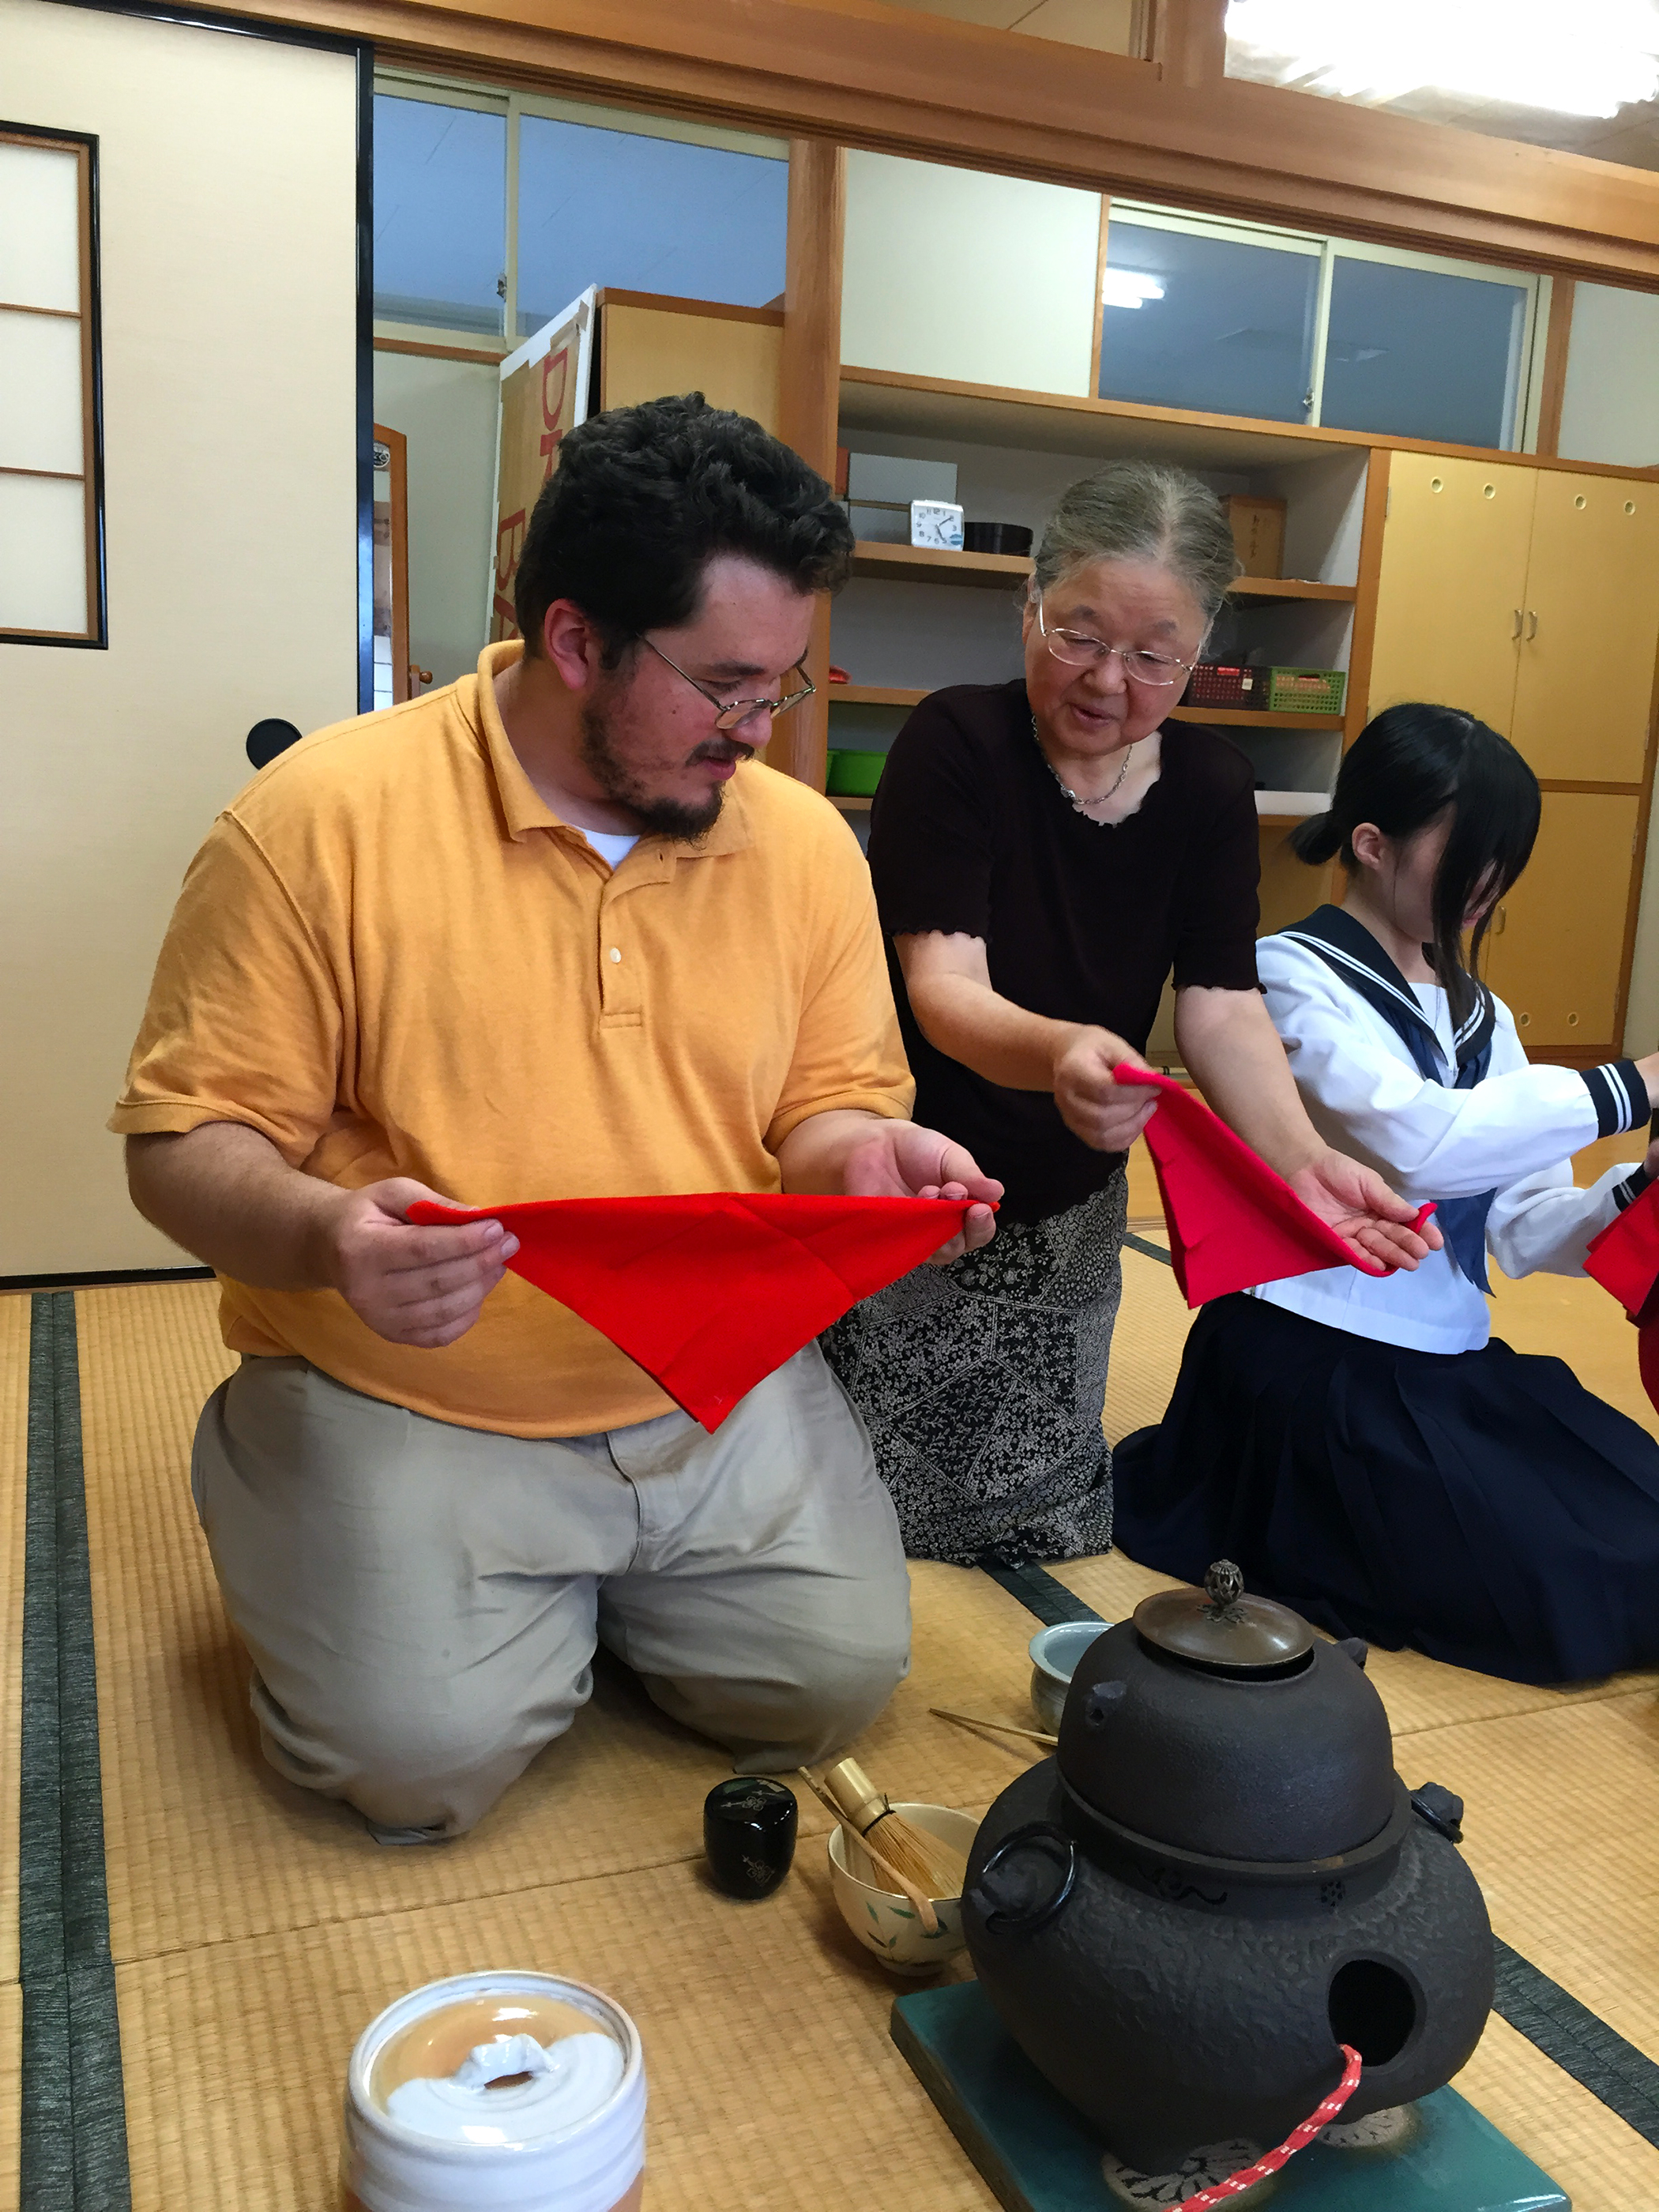 Jeremy Salzer of Laurinburg is living abroad in Japan under an exchange program to teach Japanese students English. Since arriving in Japan on Aug. 1, he has entrenched himself in the Japanese culture. He is pictured practicing the different elements surrounding the tea ceremony.